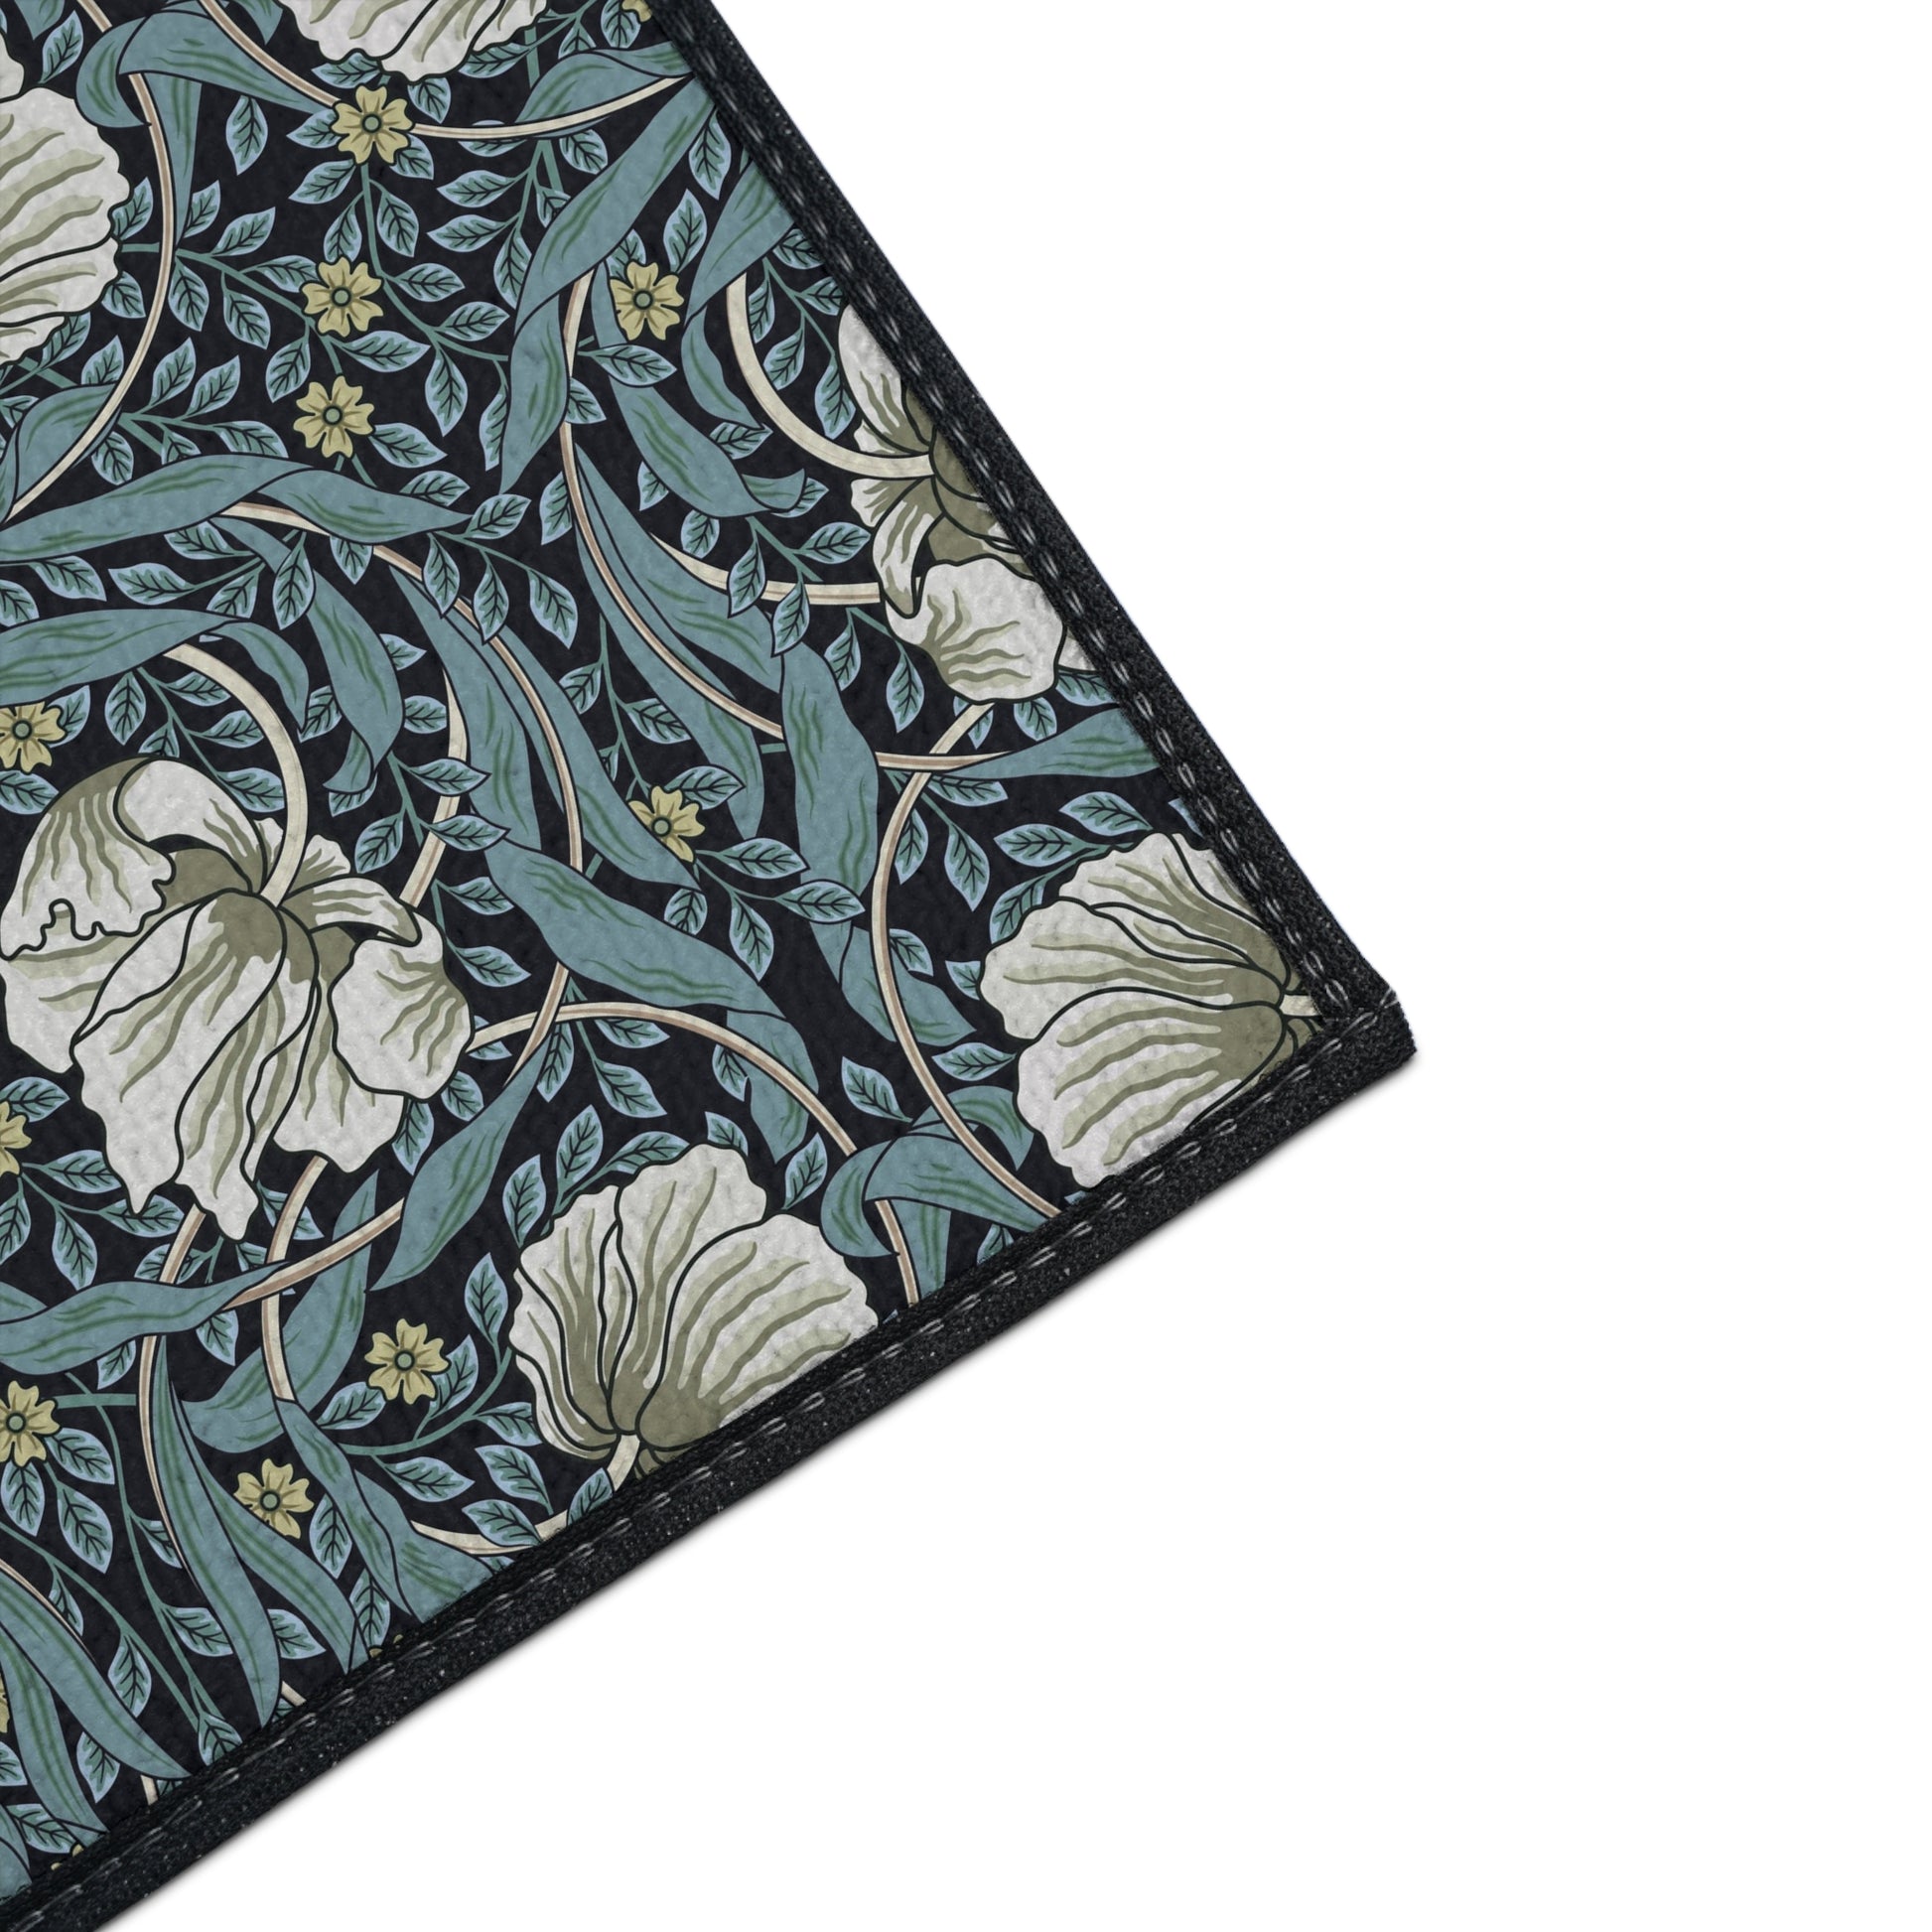 william-morris-co-heavy-duty-floor-mat-pimpernel-collection-slate-22